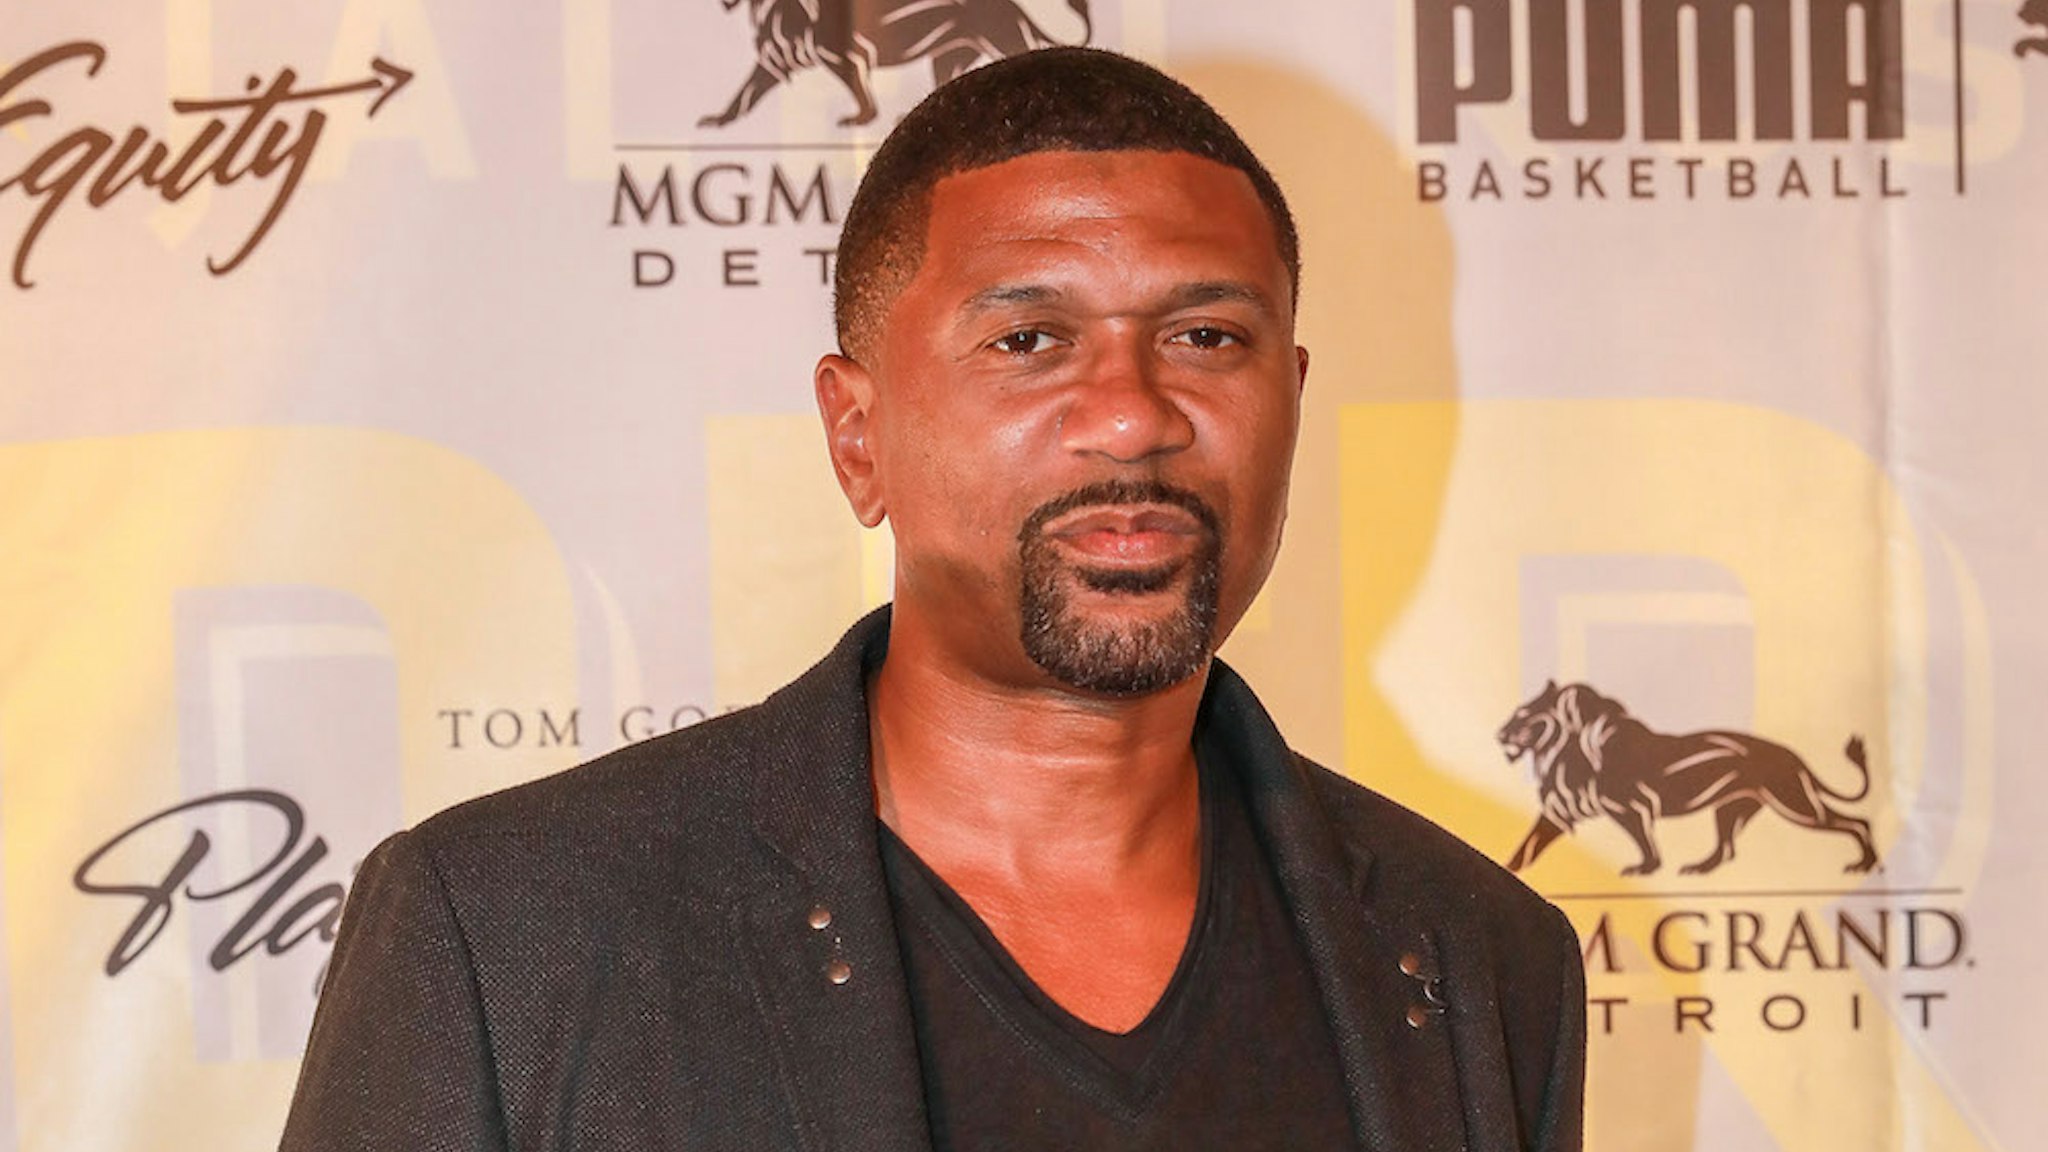 DETROIT, MI - AUGUST 26: American professional basketball player, current sports analyst for ESPN, and cofounder of the Jalen Rose Leadership Academy attends the Jalen Rose Leadership Academy Red Carpet &amp; Gala presented by MGM Grand Detroit at MGM Detroit Grand Ballroom on August 26, 2018 in Detroit, Michigan. (Photo by Scott Legato/Getty Images for Jalen Rose Leadership Academy (PGD Global Event))